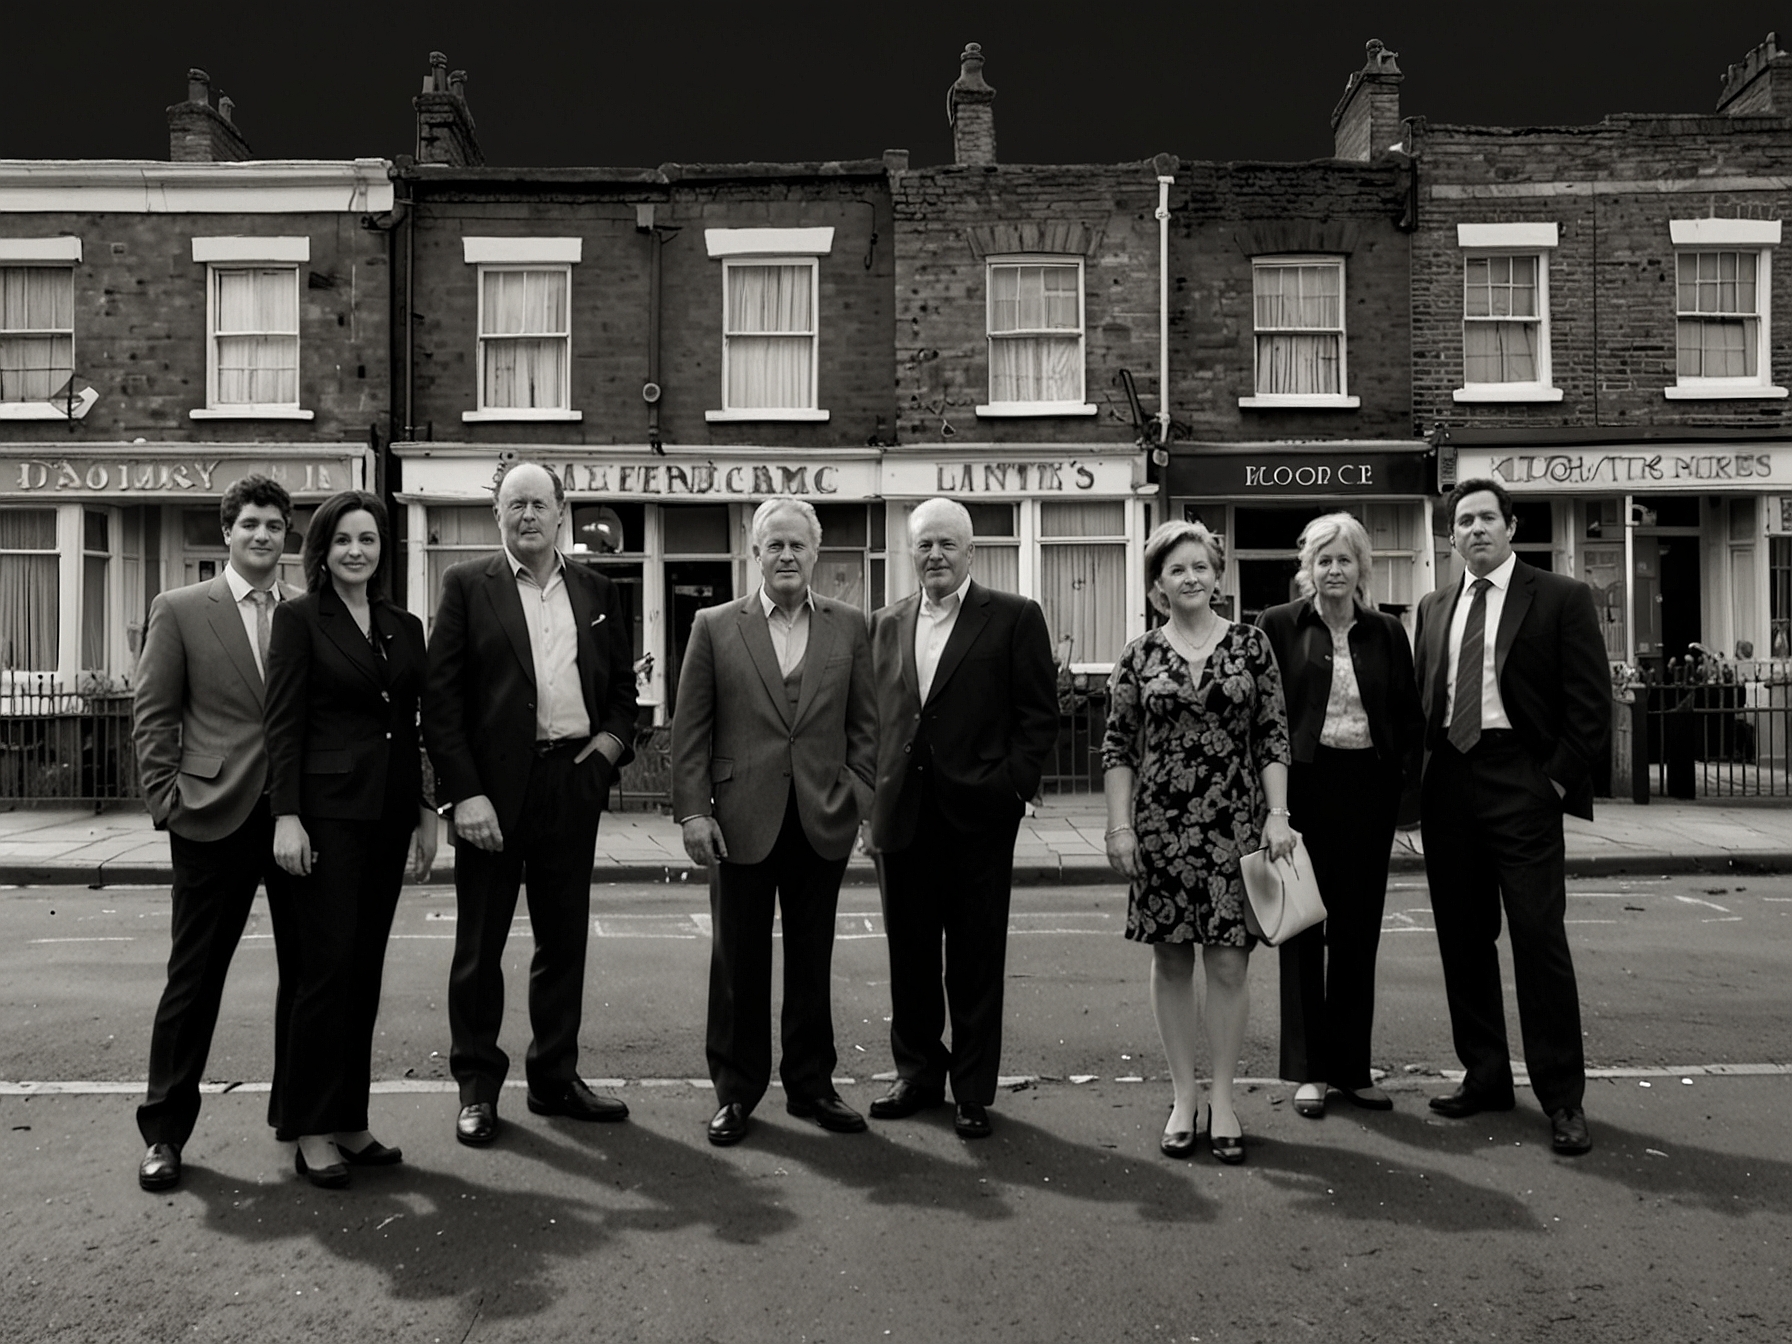 A nostalgic photo capturing the essence of EastEnders, showcasing both veteran and new cast members in the iconic setting of Albert Square, celebrating the show's 40-year journey.